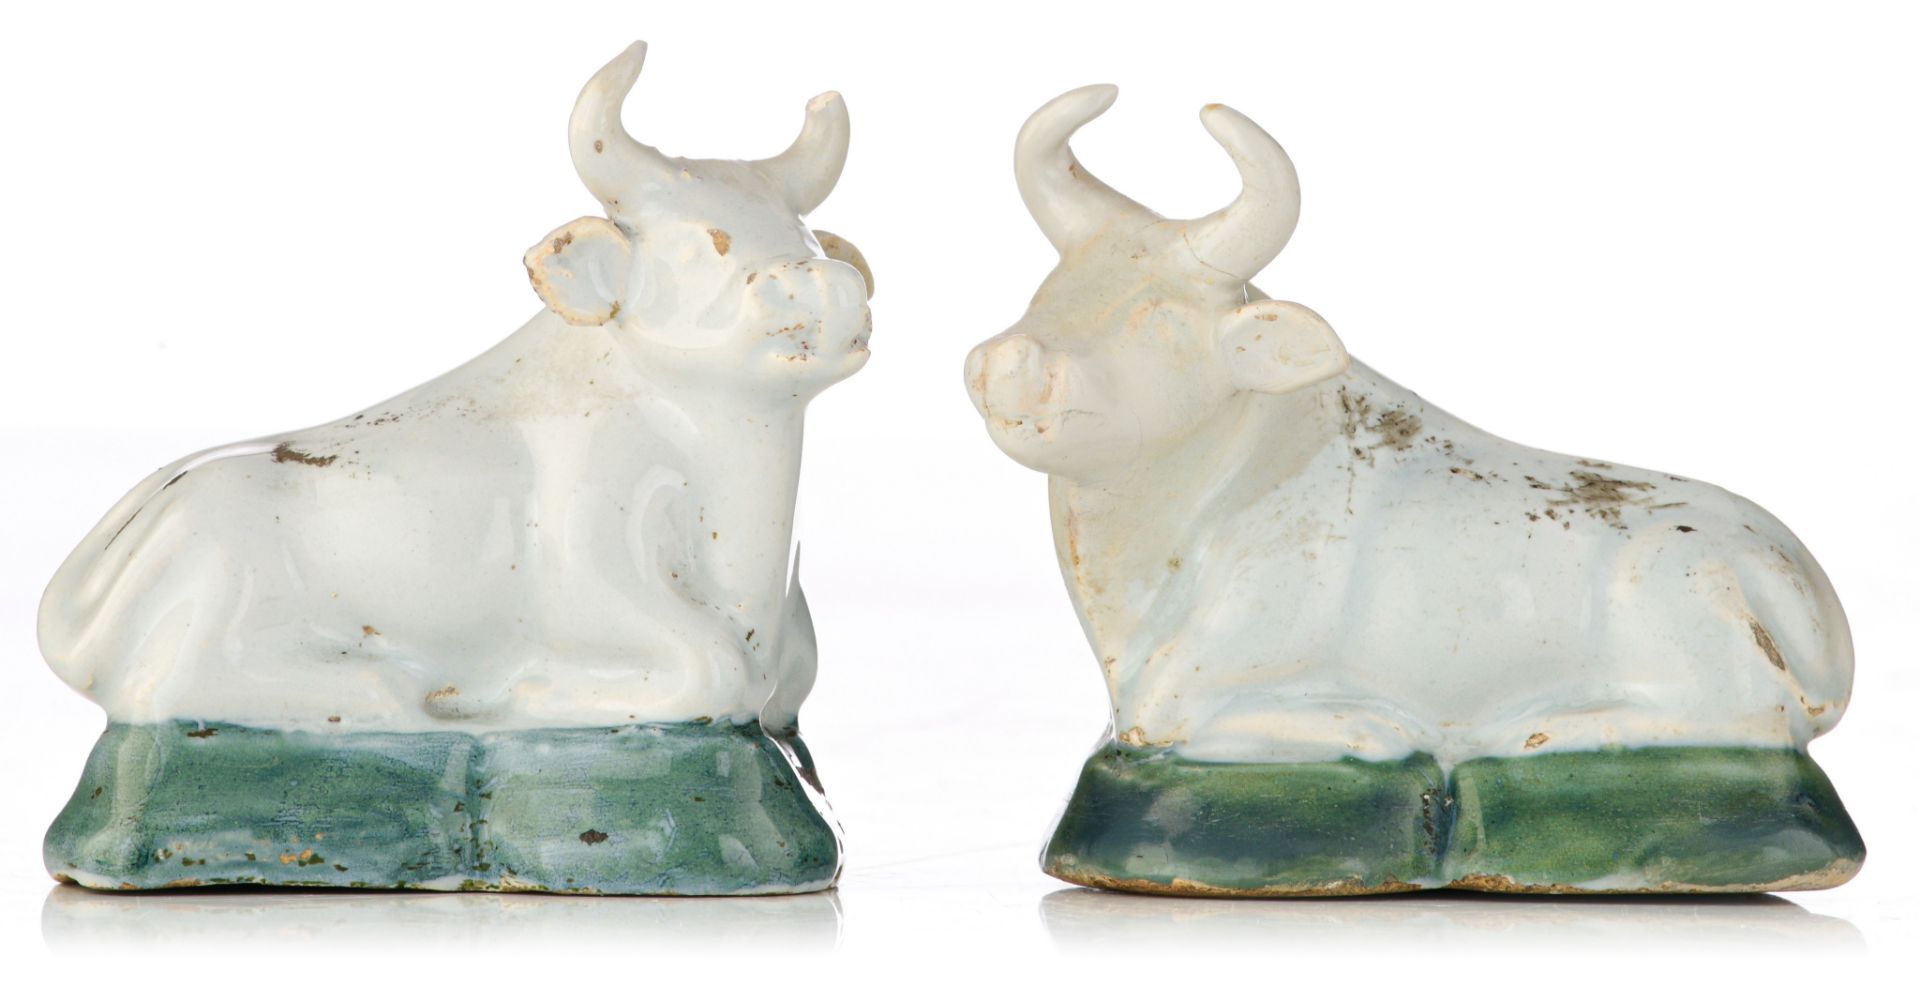 (BIDDING ONLY ON CARLOBONTE.BE) A rare pair of white Delft figures of cows, 18thC, marked Geertruy V - Image 2 of 16